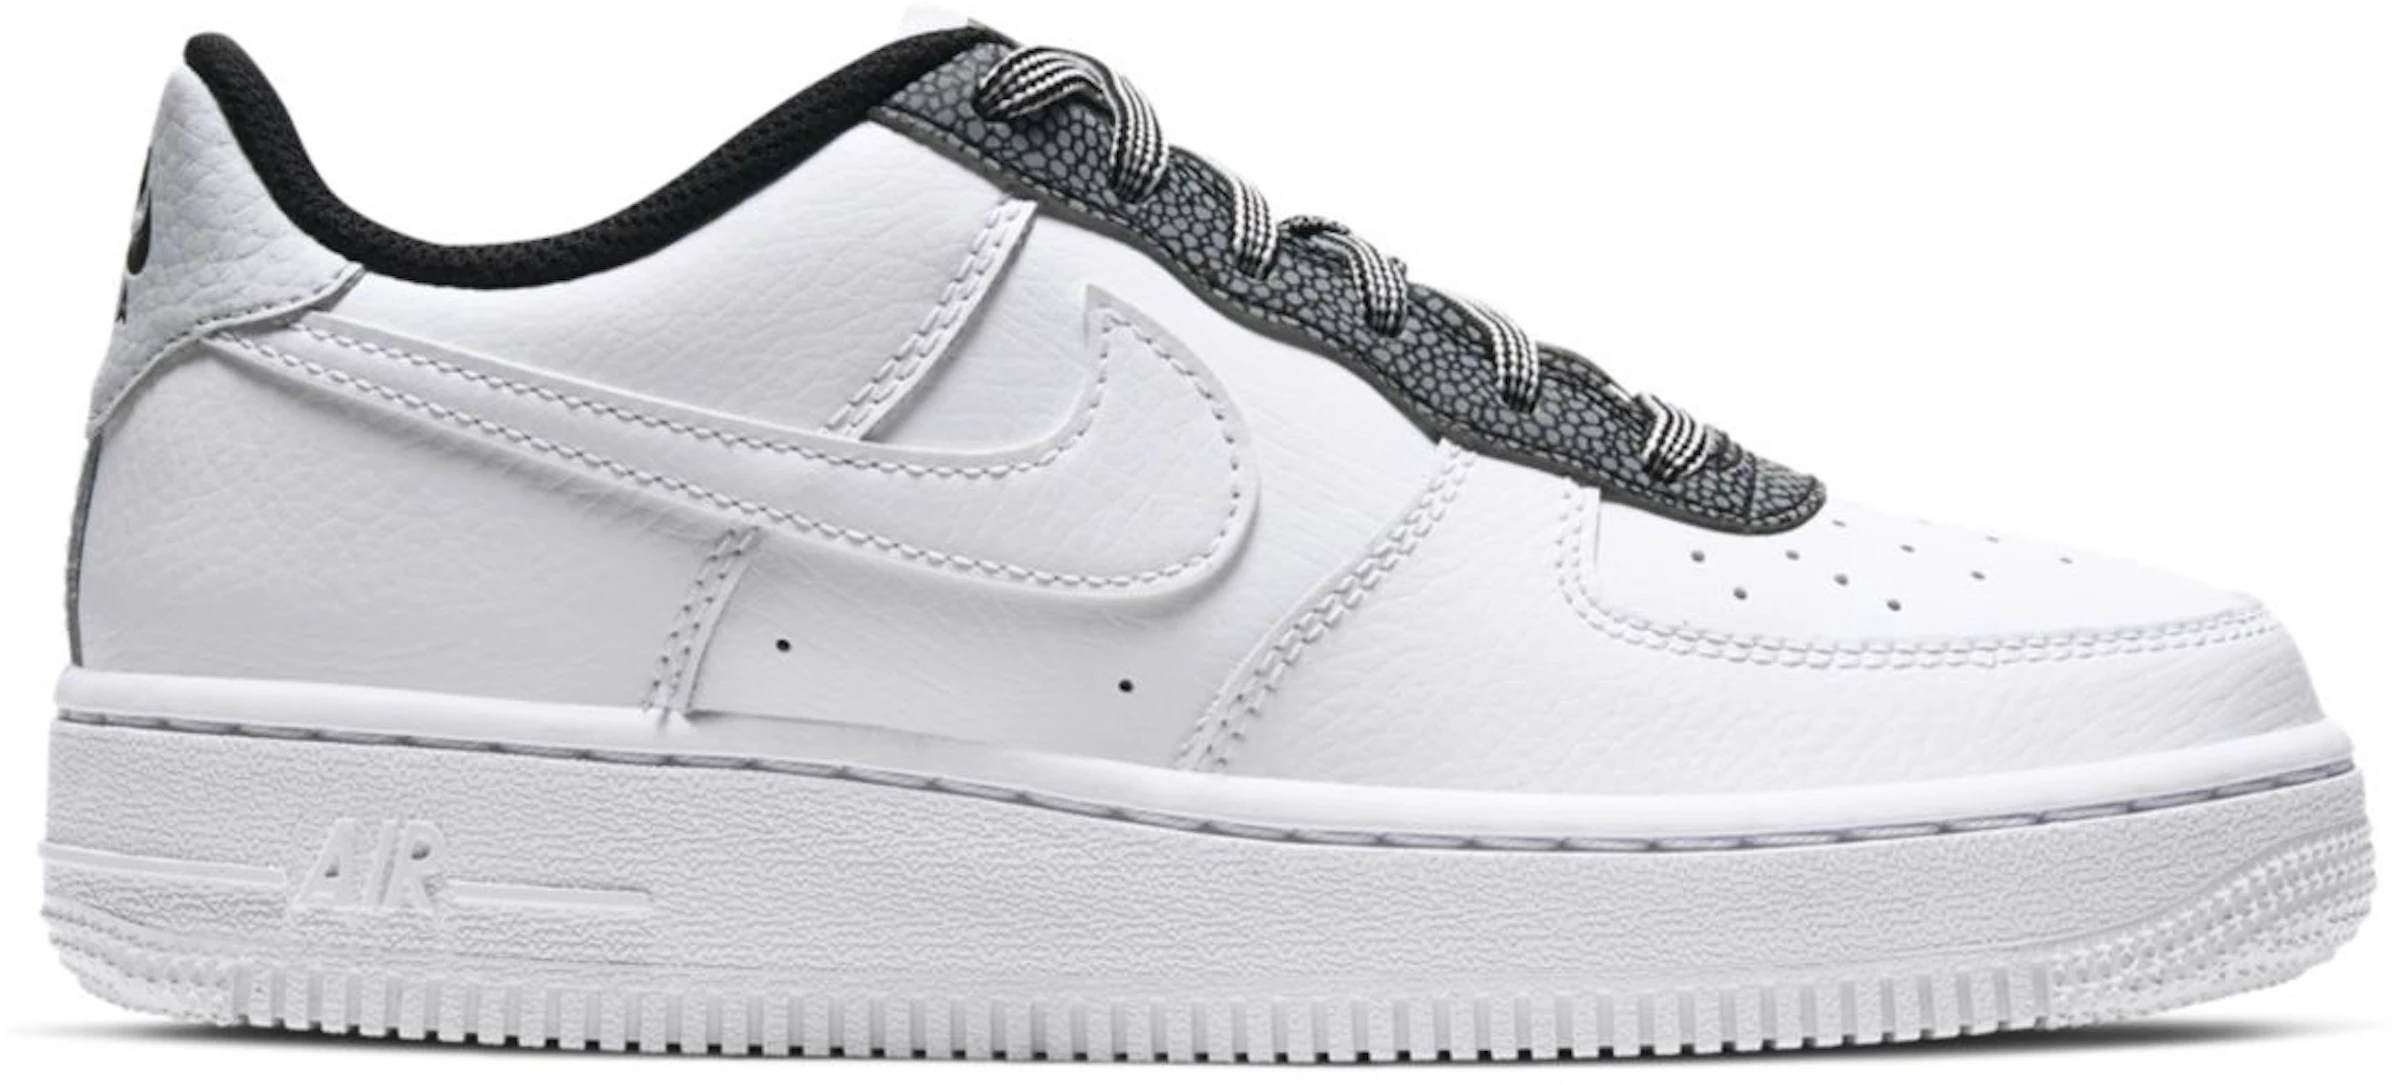 Nike Force 1 Low LV8 White Cool Grey (GS) - CN5715-100 -